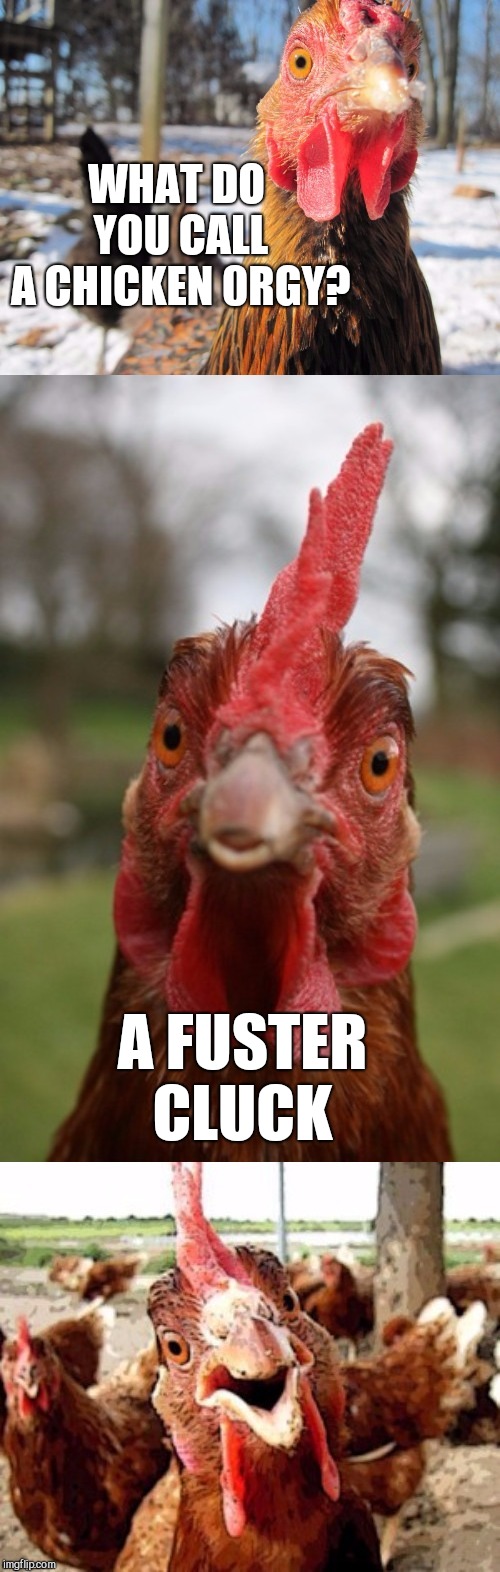 Recycling one of my old ones for Chicken Week, April 2-8, a JBmemegeek & giveuahint event!  | WHAT DO YOU CALL A CHICKEN
0RGY? A FUSTER CLUCK | image tagged in bad pun chicken,anti joke chicken,chicken week,jbmemegeek,giveuahint,bad puns | made w/ Imgflip meme maker